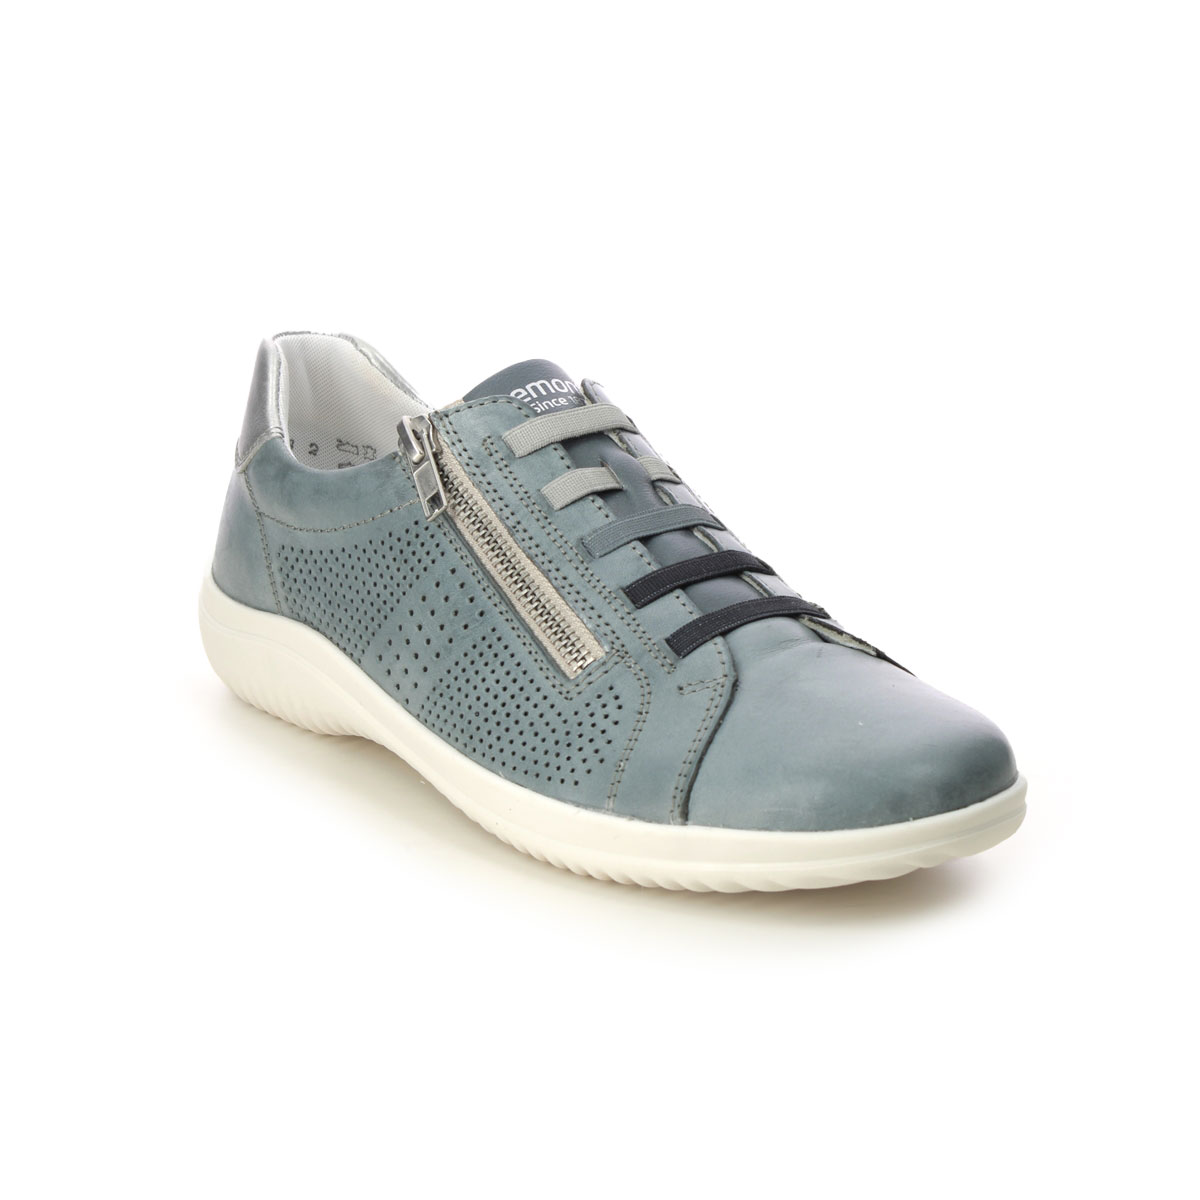 Remonte D1E02-14 Livonbungee Zip Denim leather Womens lacing shoes in a Plain Leather in Size 38